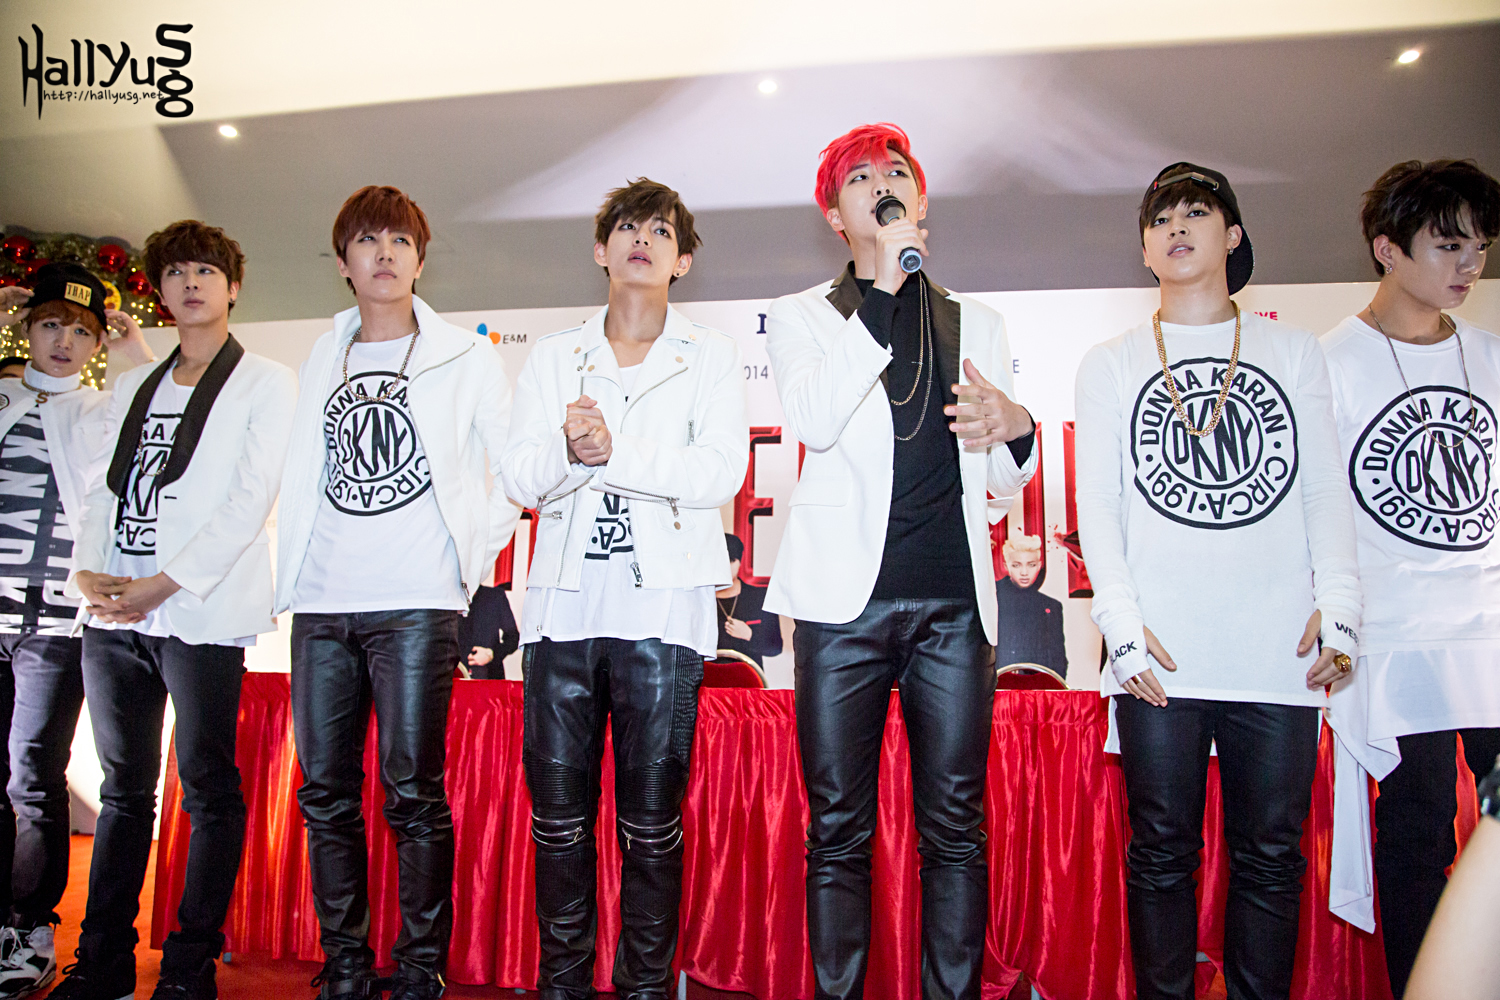 [COVER] Fansign & Hi-Five Session: Getting up-close and personal with the Bangtan Boys ...1500 x 1000